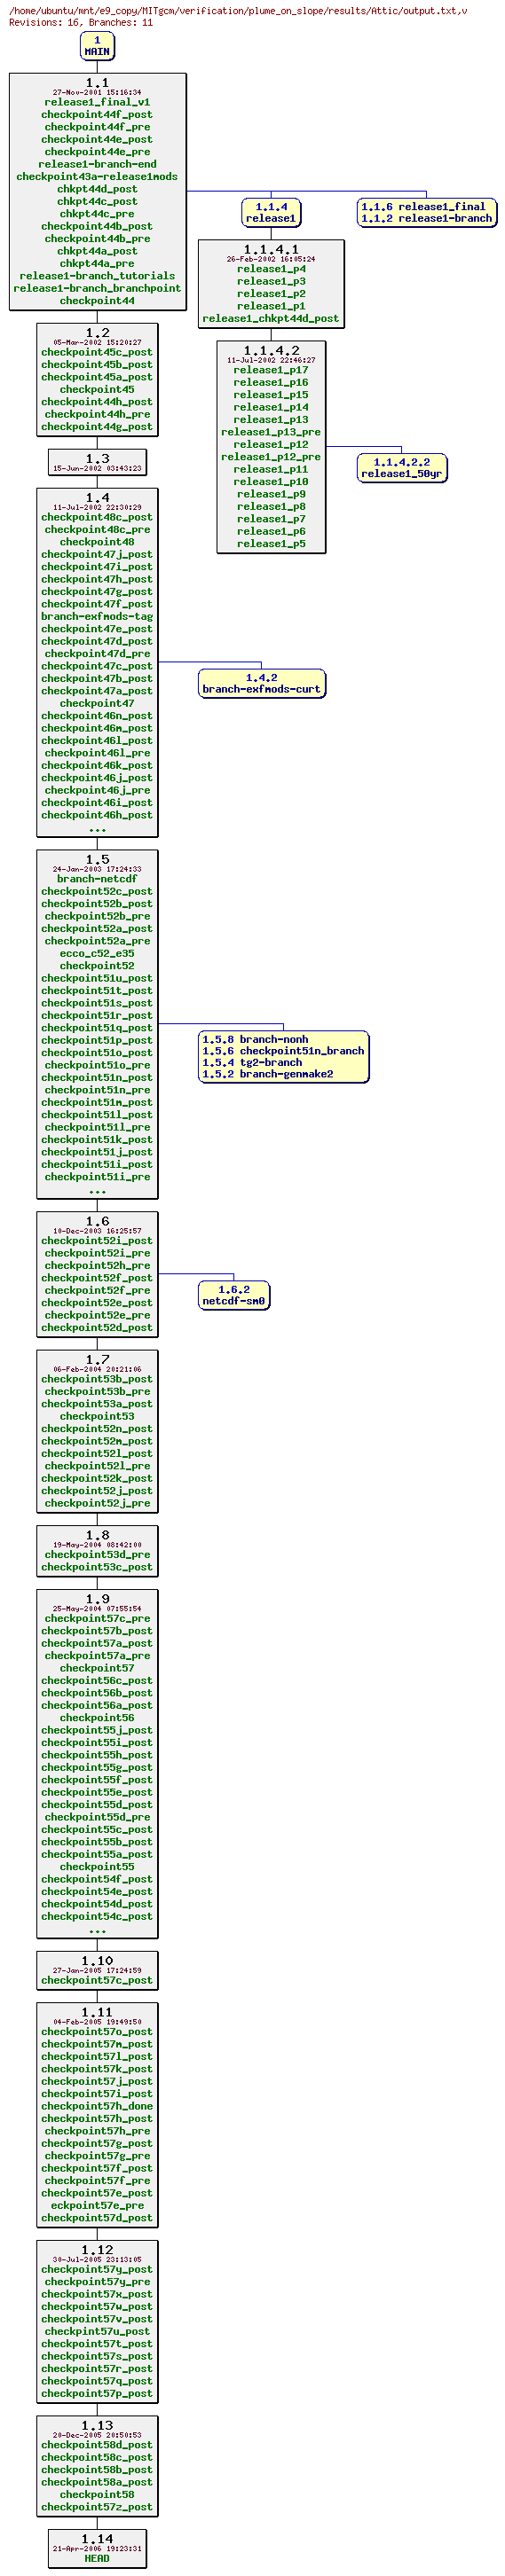 Revisions of MITgcm/verification/plume_on_slope/results/output.txt